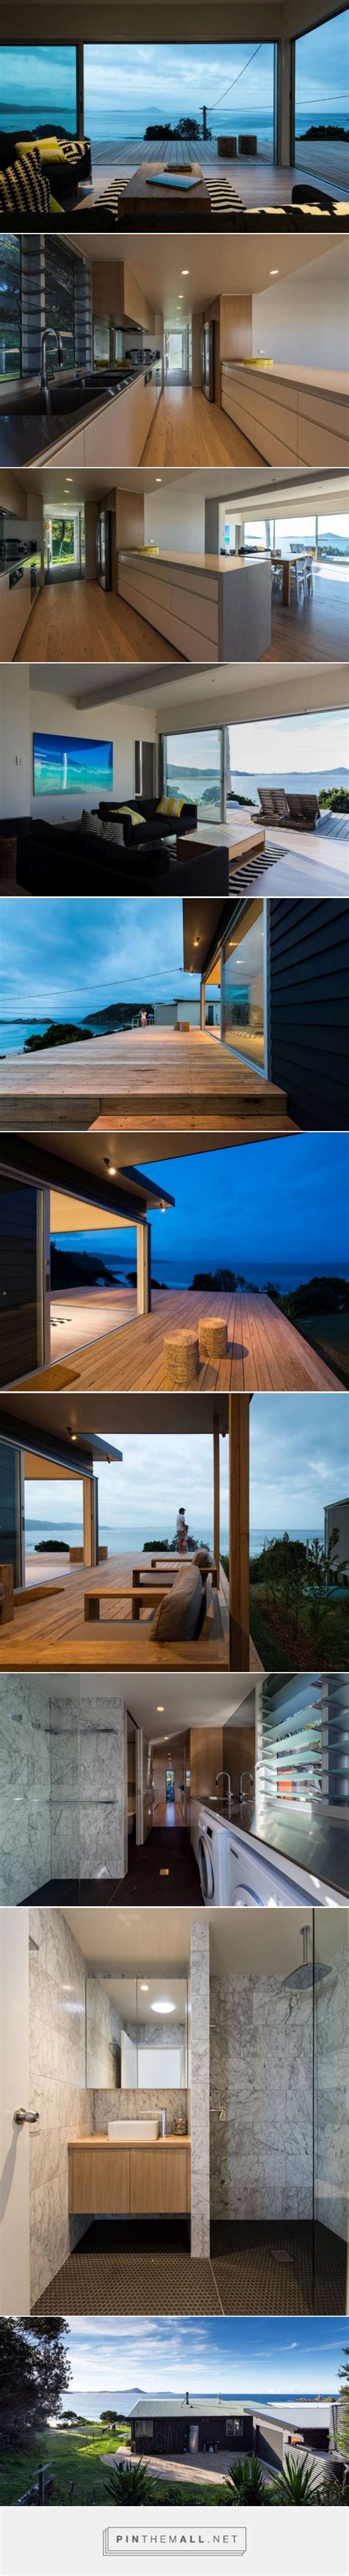 Seal Rocks House 9 By Bourne Blue Architecture Created On 2015 09